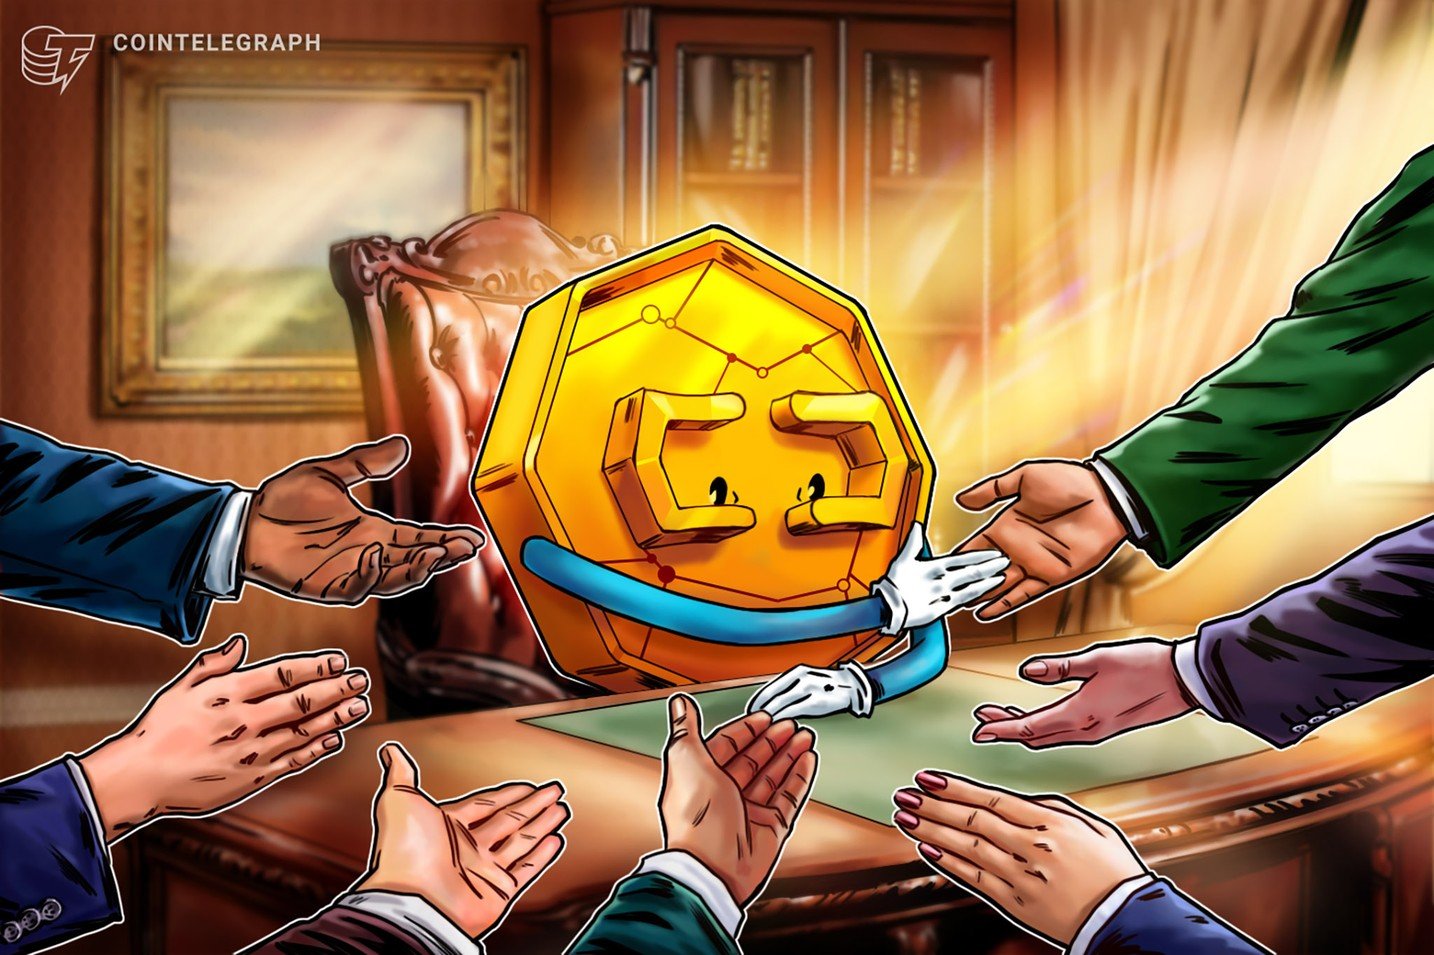 US corporate interest in crypto strong despite implementation hurdles